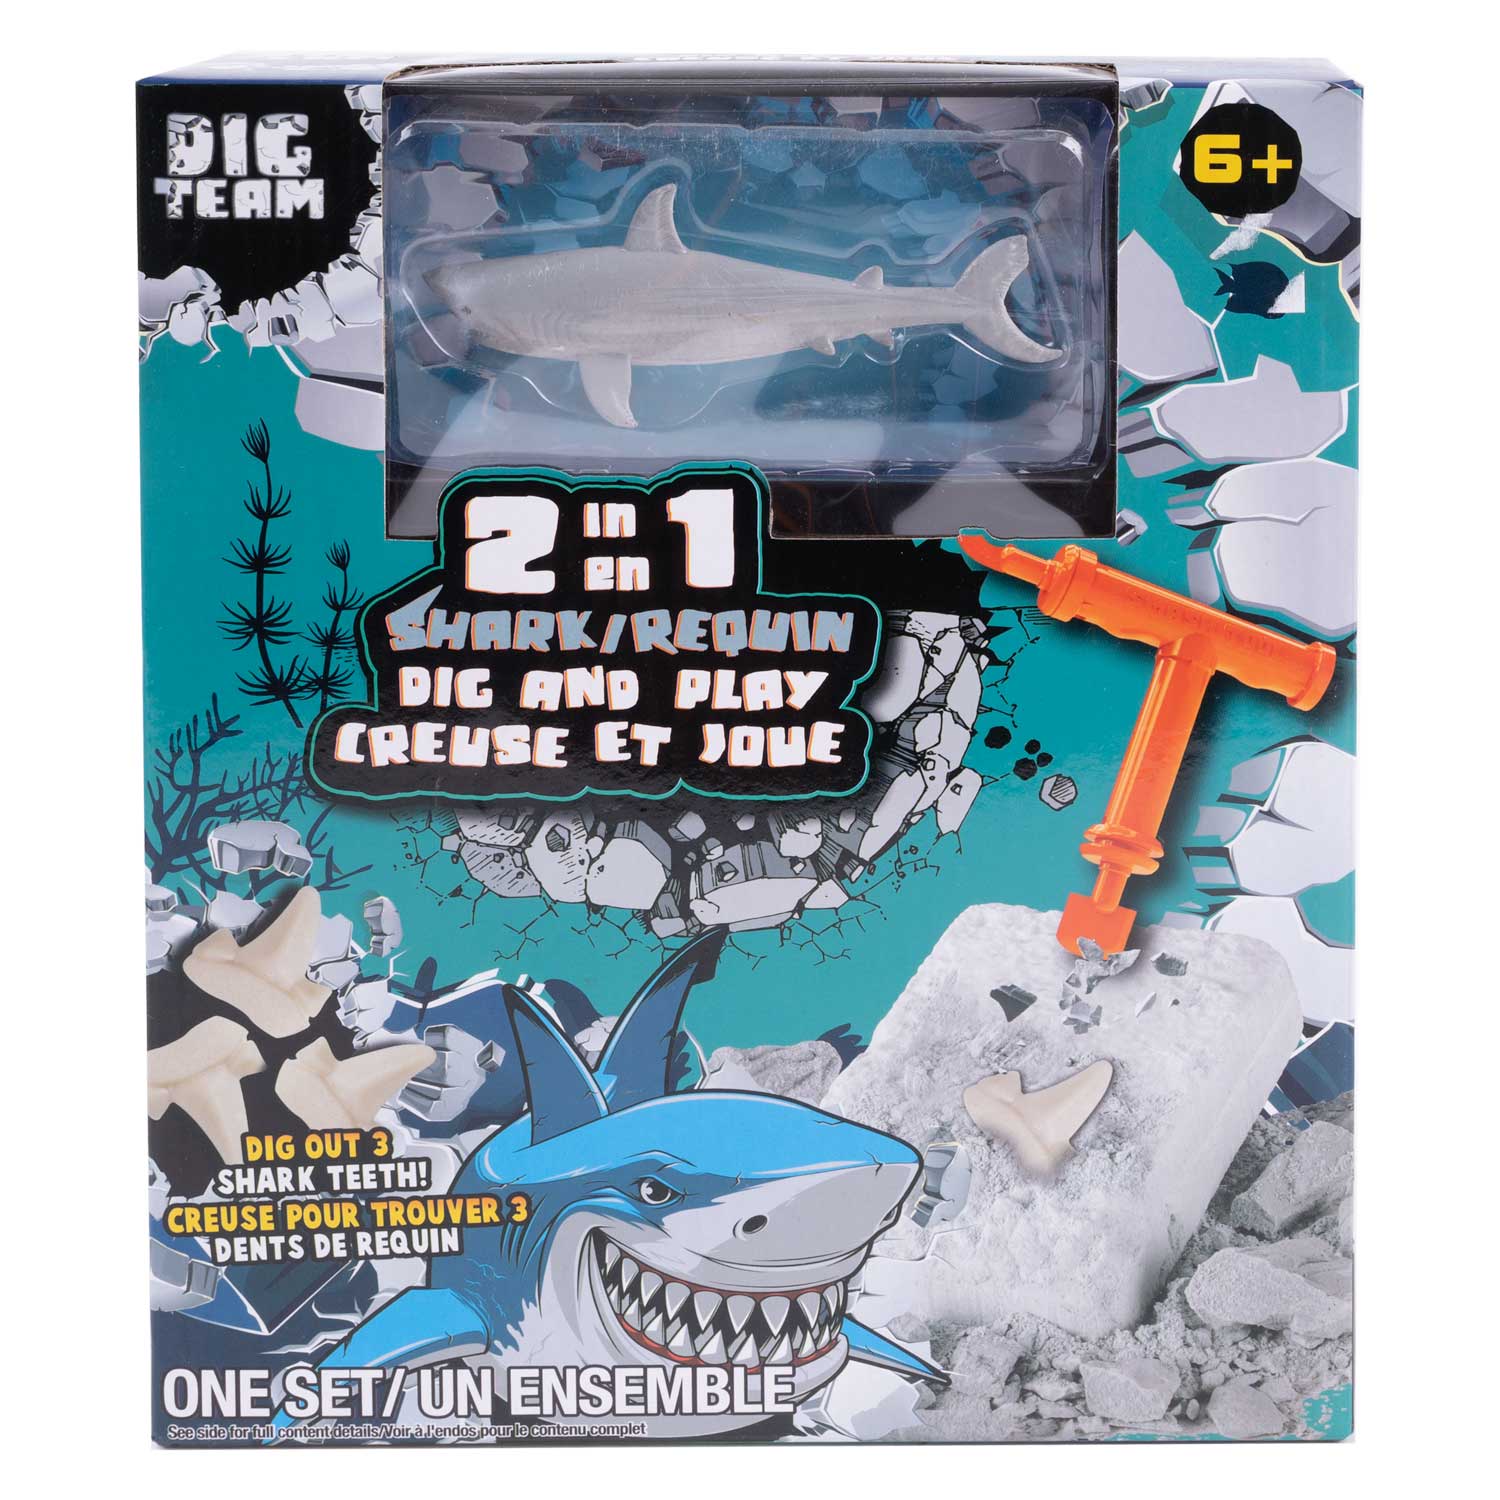 Dig Team 2-in-1 shark dig and play!